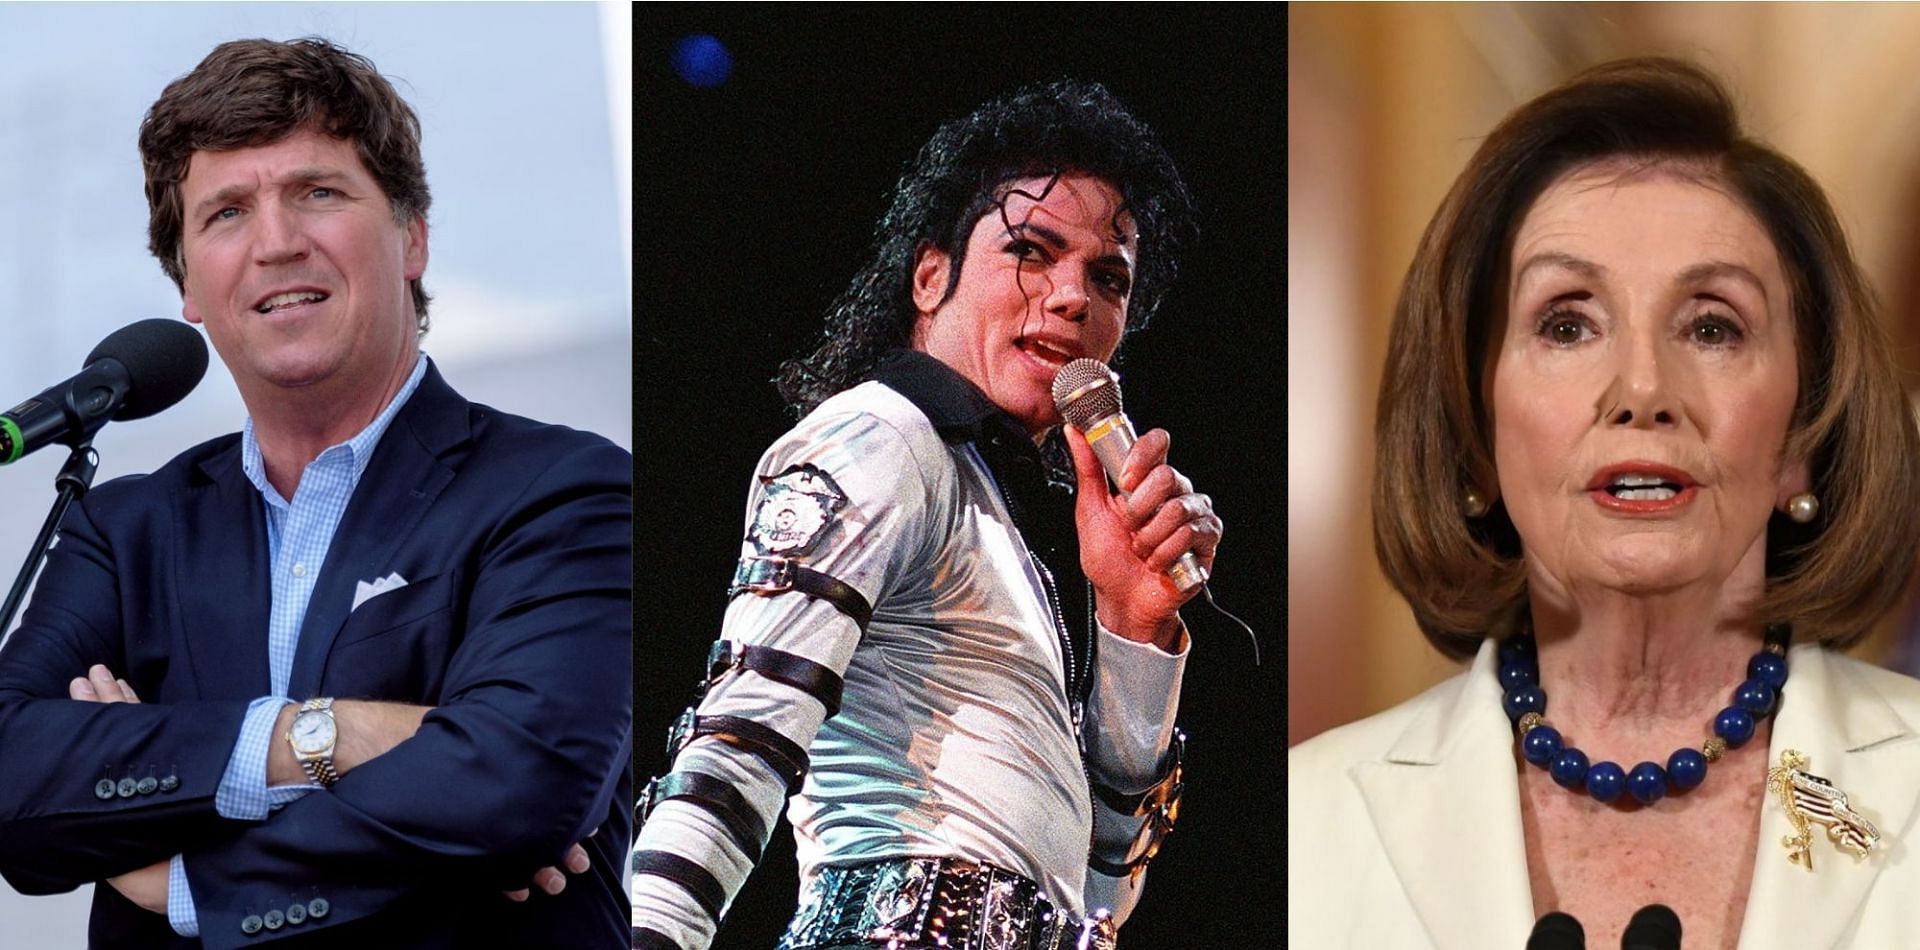 Tucker Carlson recently compared Nancy Pelosi&#039;s appearance to Michael Jackson (Image via Janos Kummer/Getty Images, Luke Frazza/Getty Images and Saul Loeb/Getty Images)